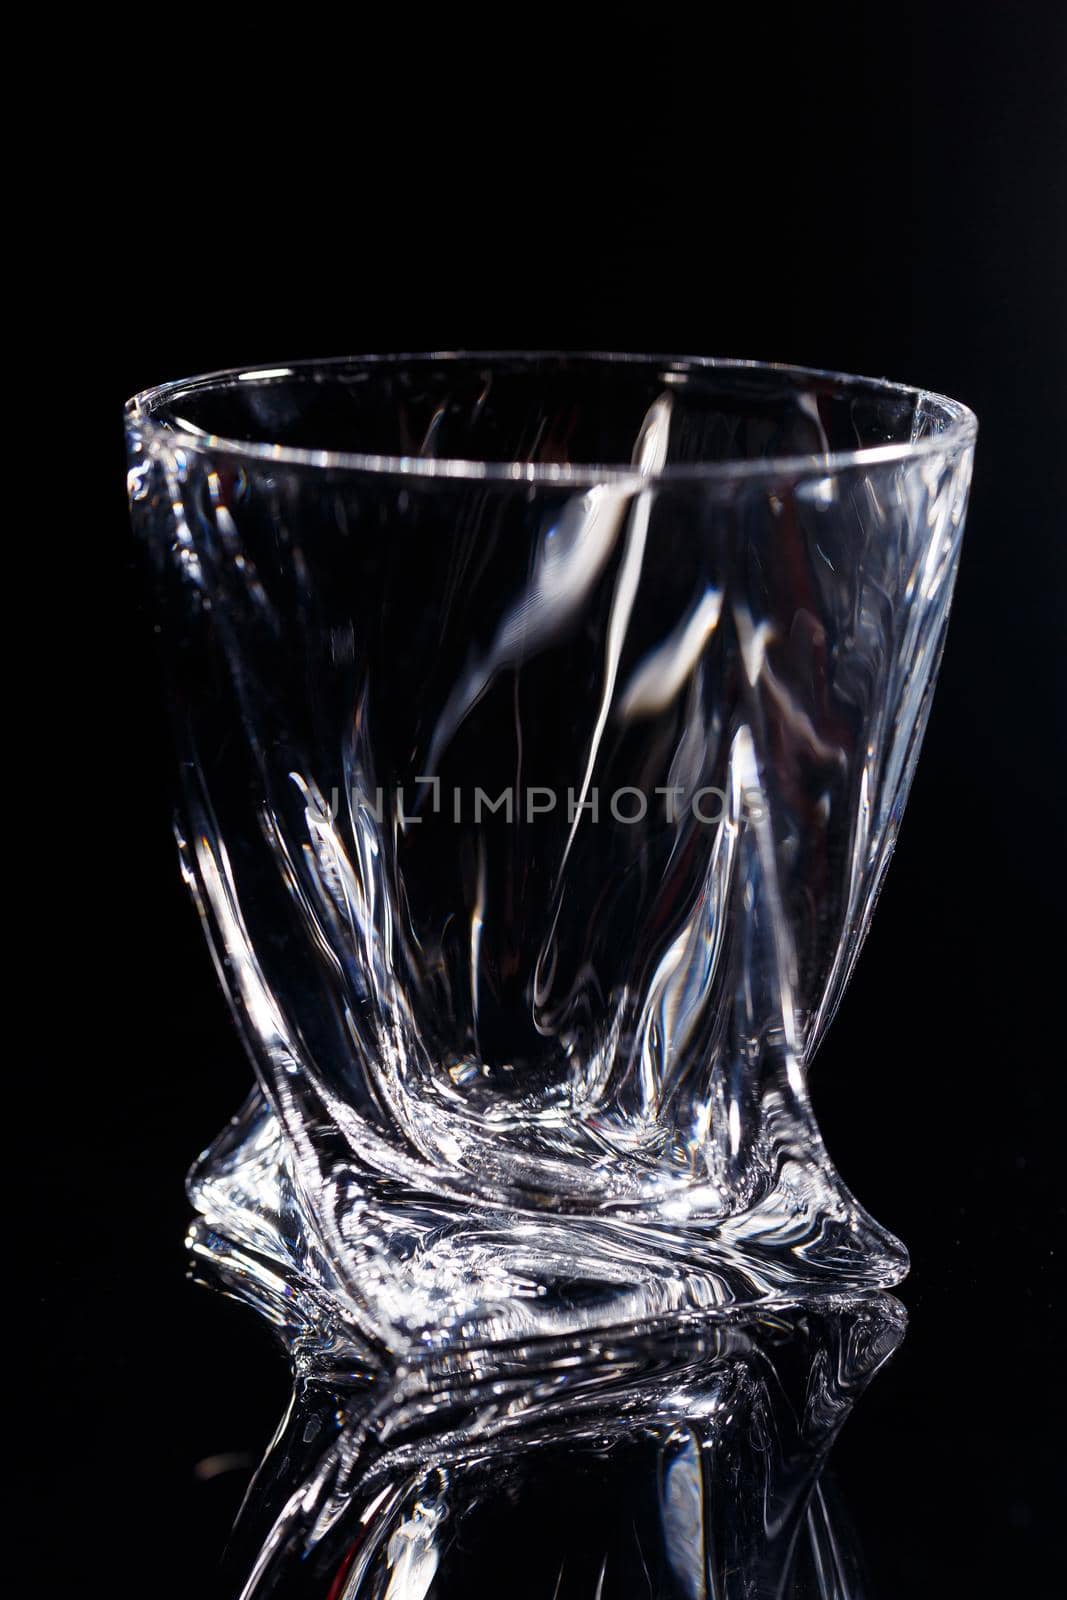 Black background stands a clean glass with reflection on a glass table. Facets on a Glass Cup by Dmitrytph